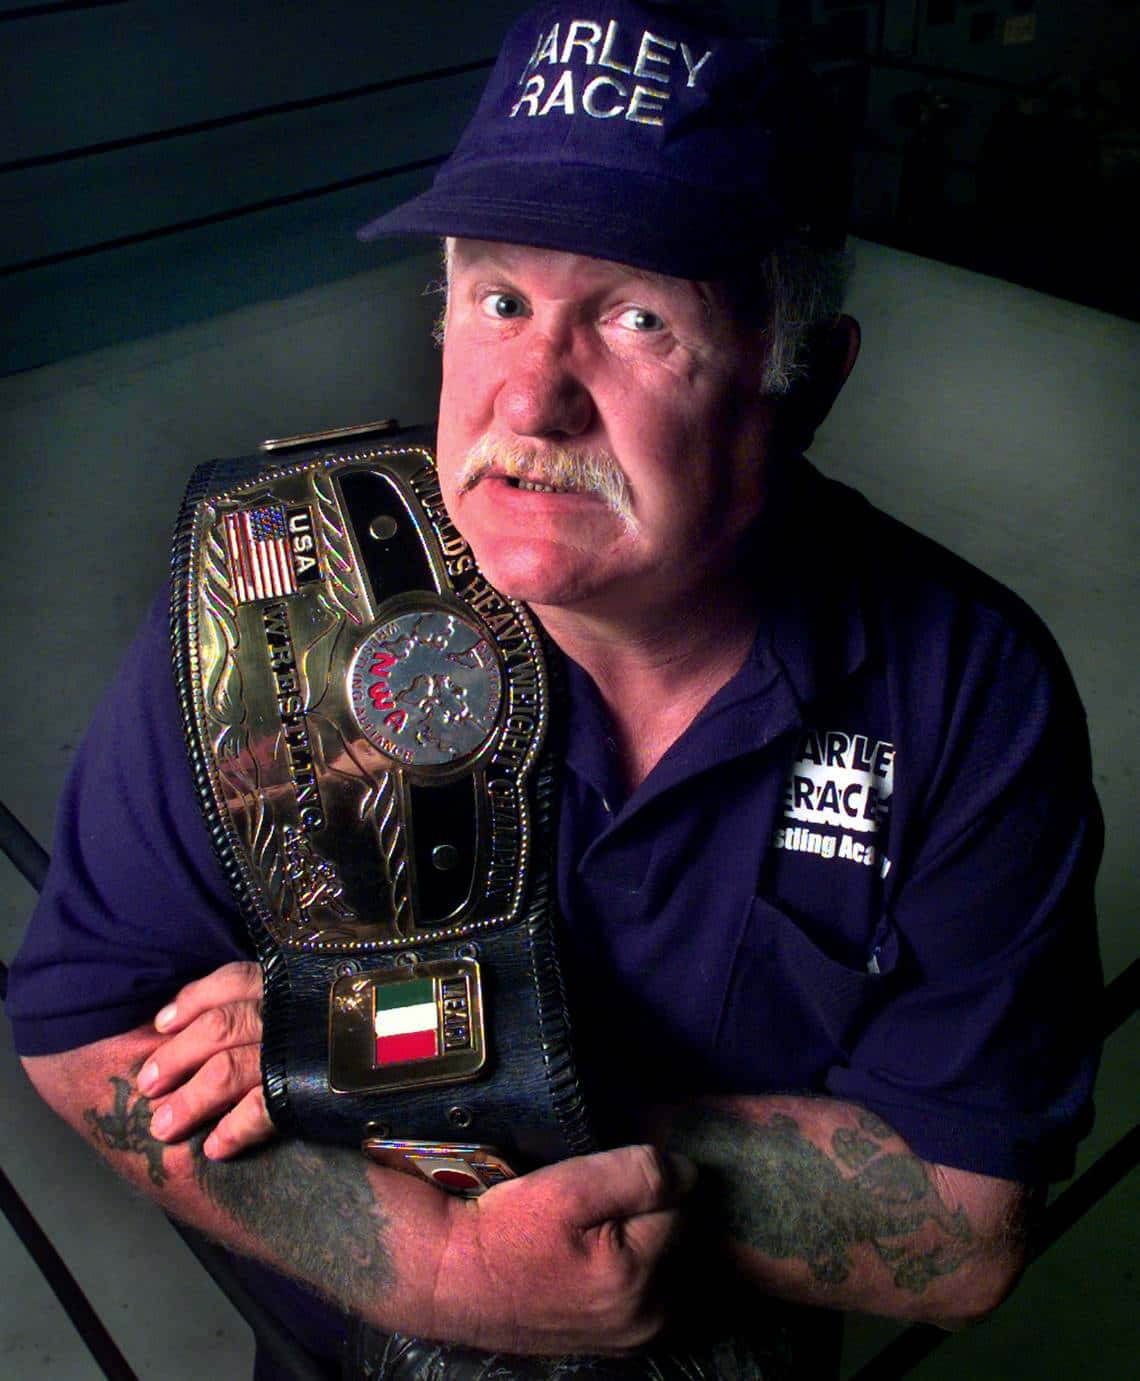 Harley Race Triumphantly Flexing Arms with NWA Championship Belt Wallpaper